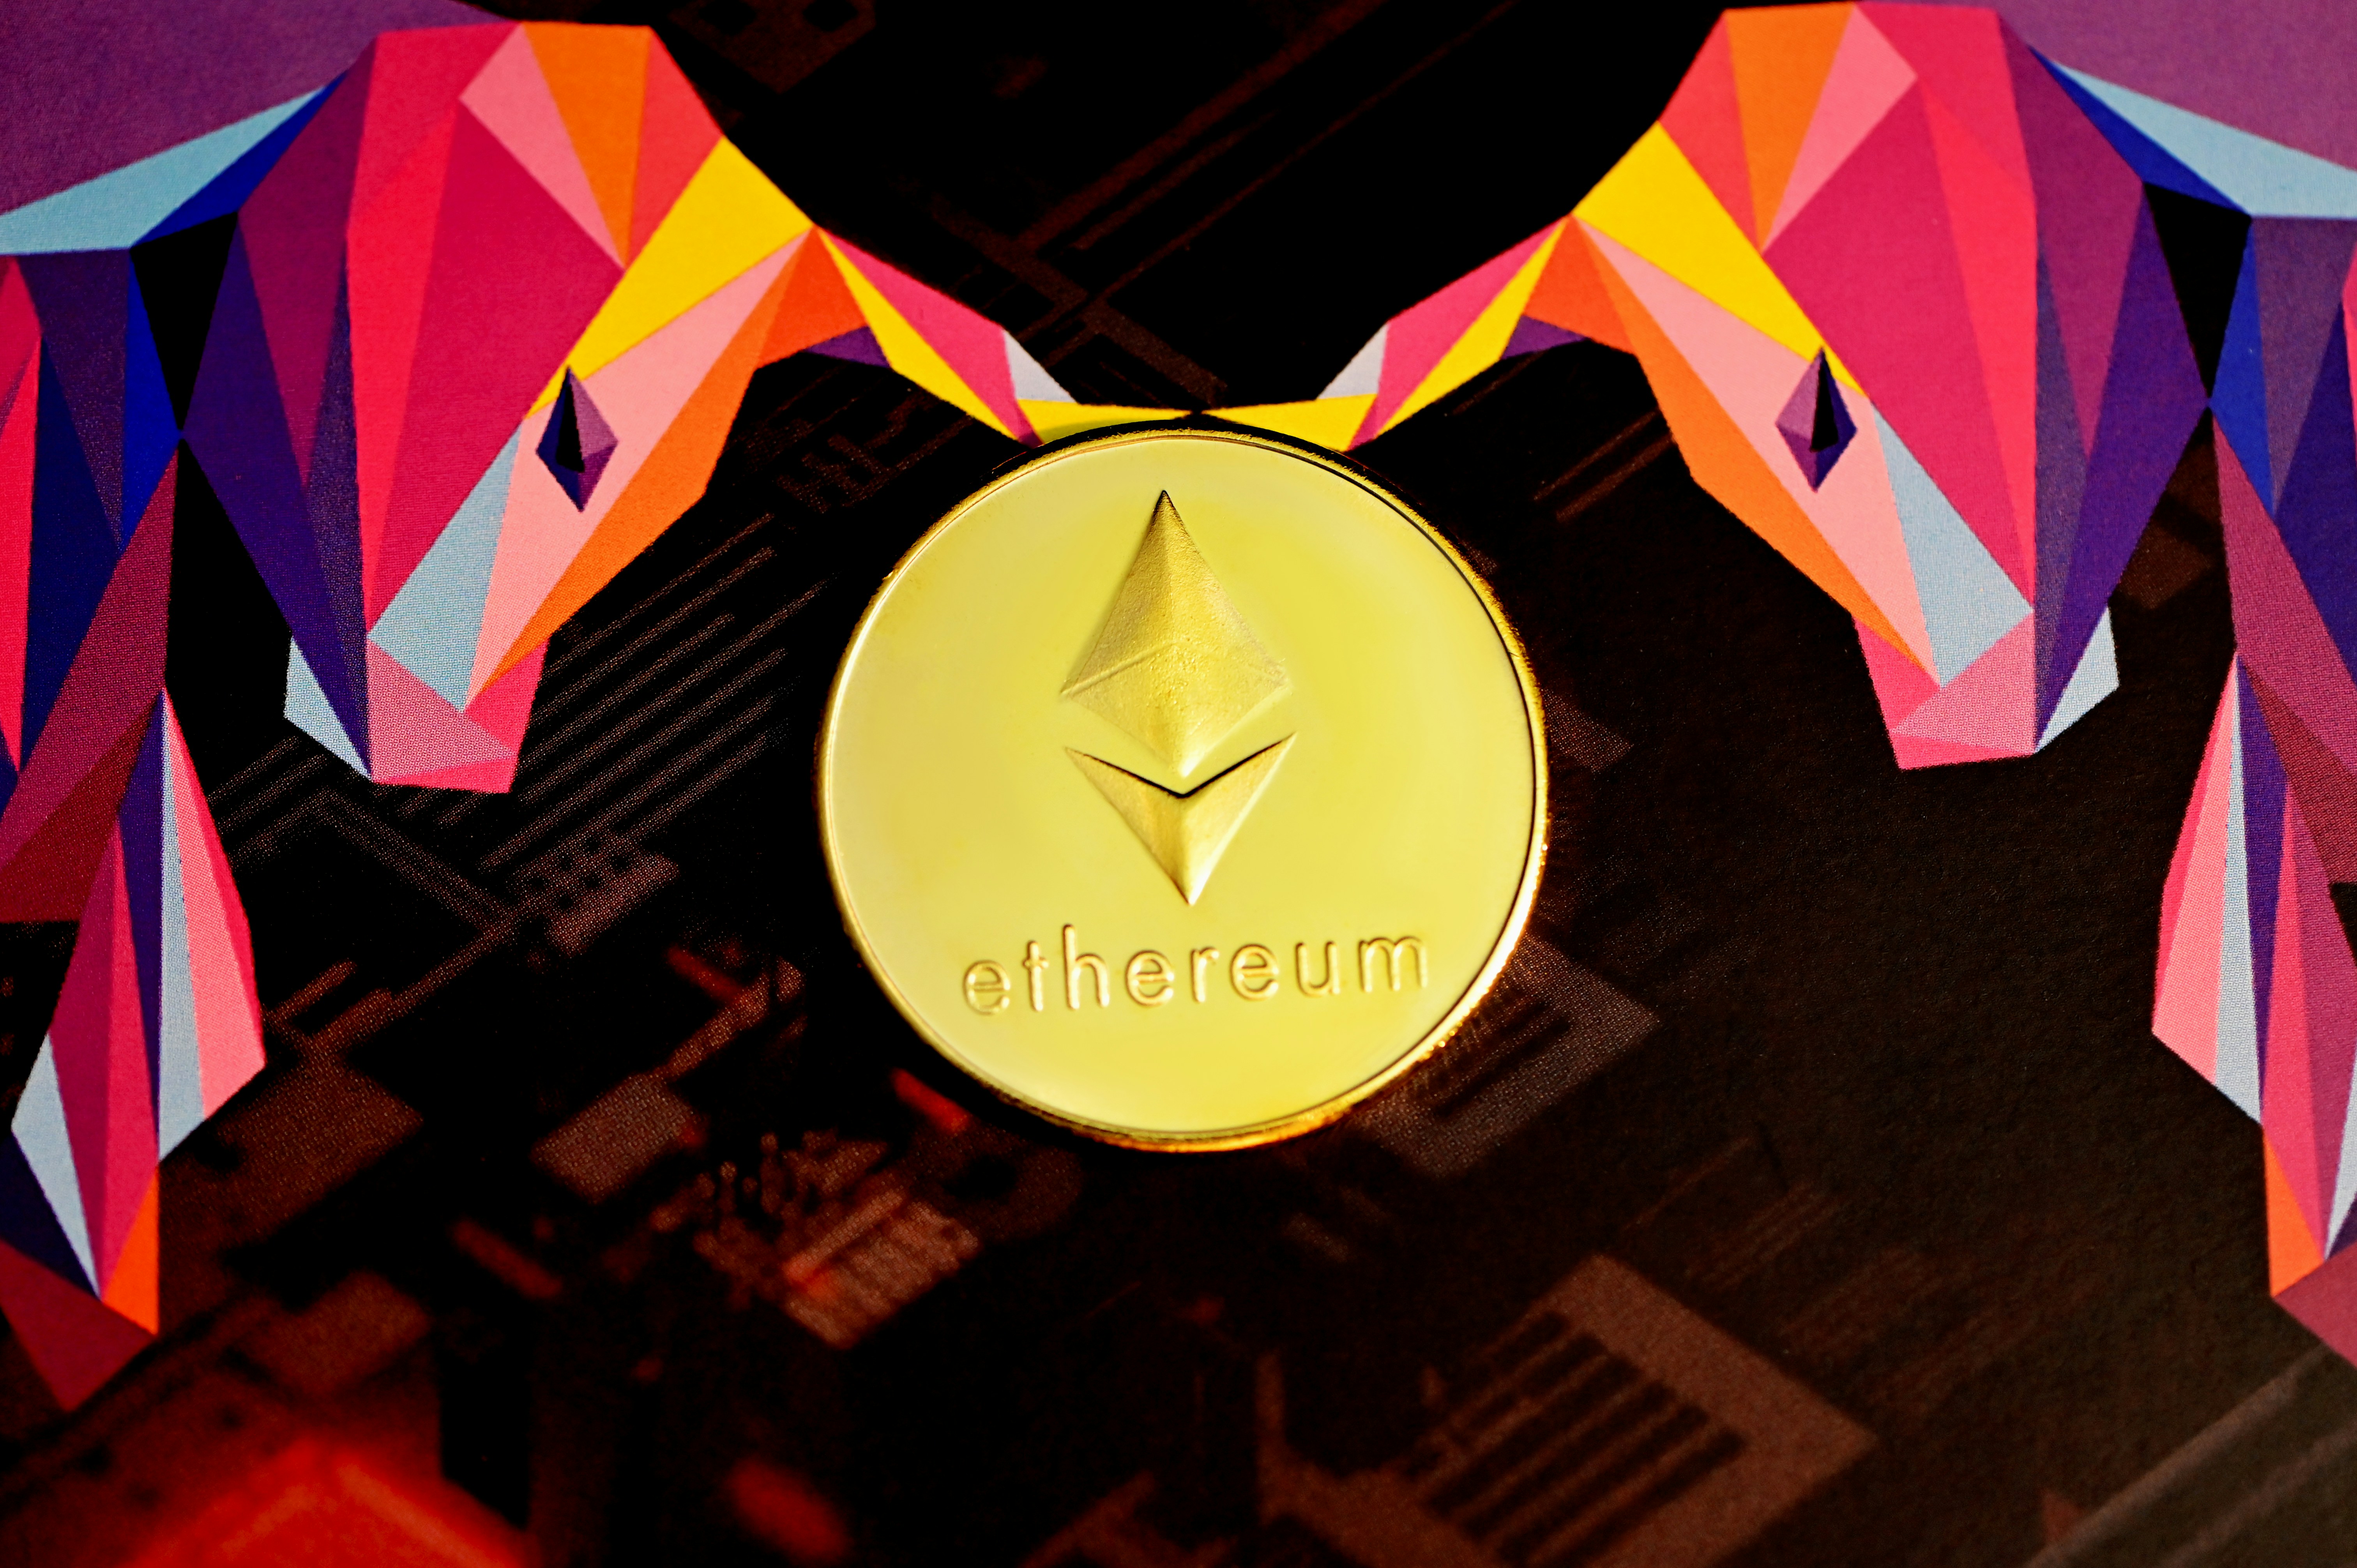 An Ethereum coin in between two executium bull logo.